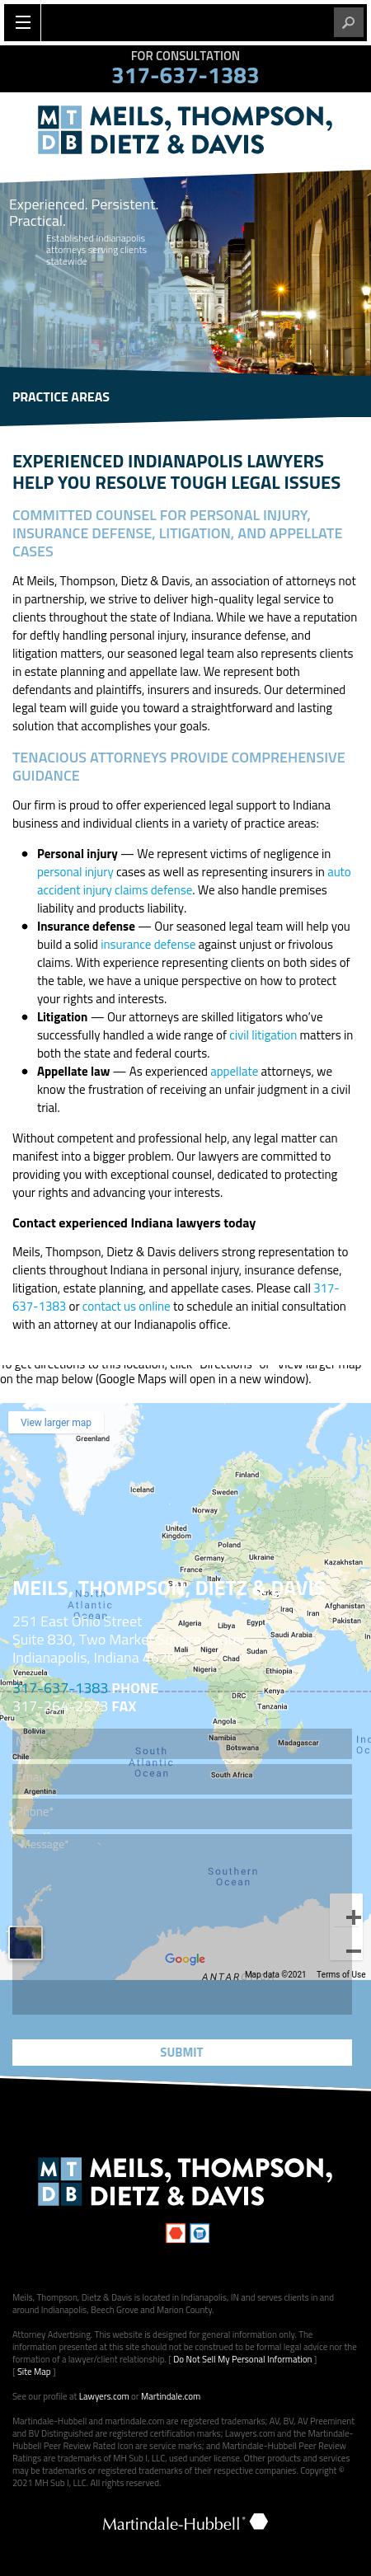 Davis, Neil D - Indianapolis IN Lawyers